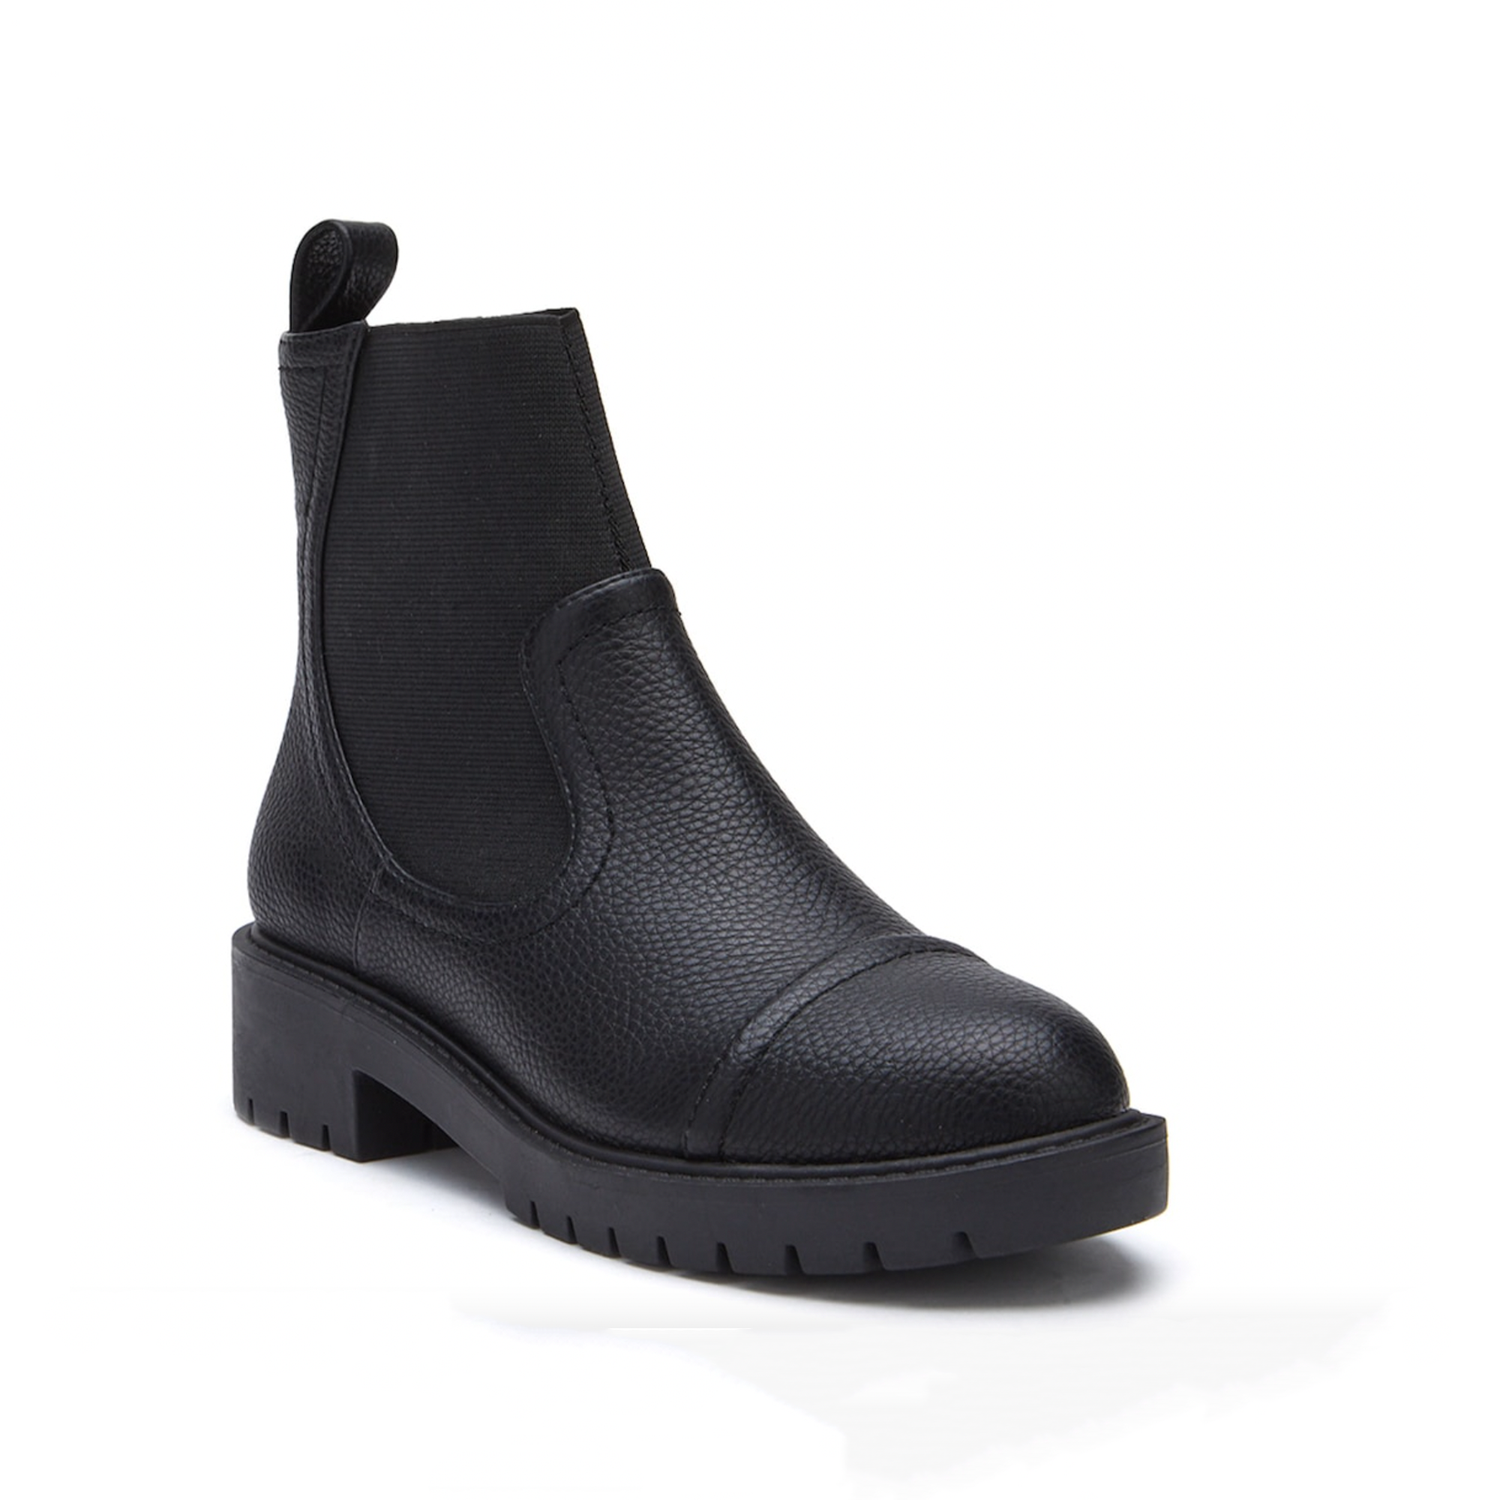 Lend a cozy, stylish update to your outfits with this bootie. This vegan, monochromatic Chelsea bootie with extended gore detail is made of synthetic upper with textured design for a wild touch and secured with a inside zipper closure for a great fit.